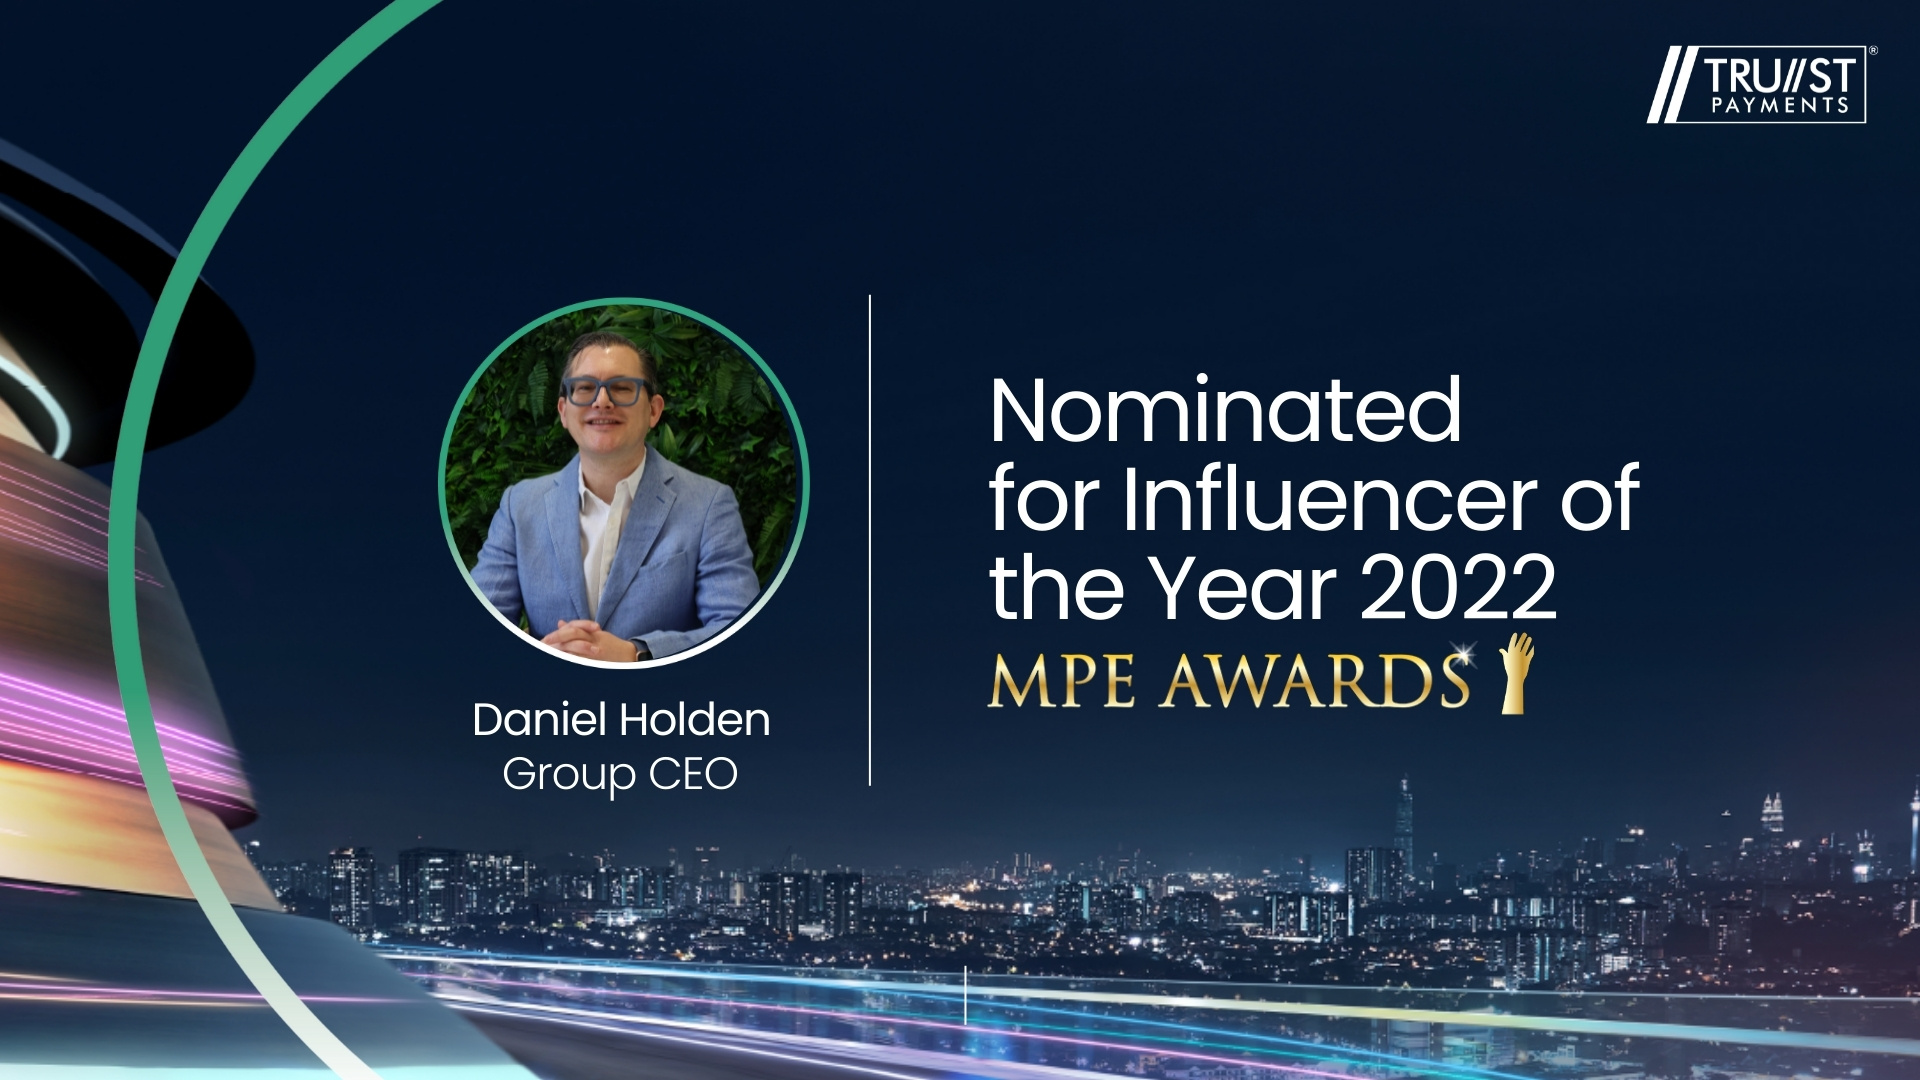 Trust Payments CEO Daniel Holden nominated for Influencer of the Year